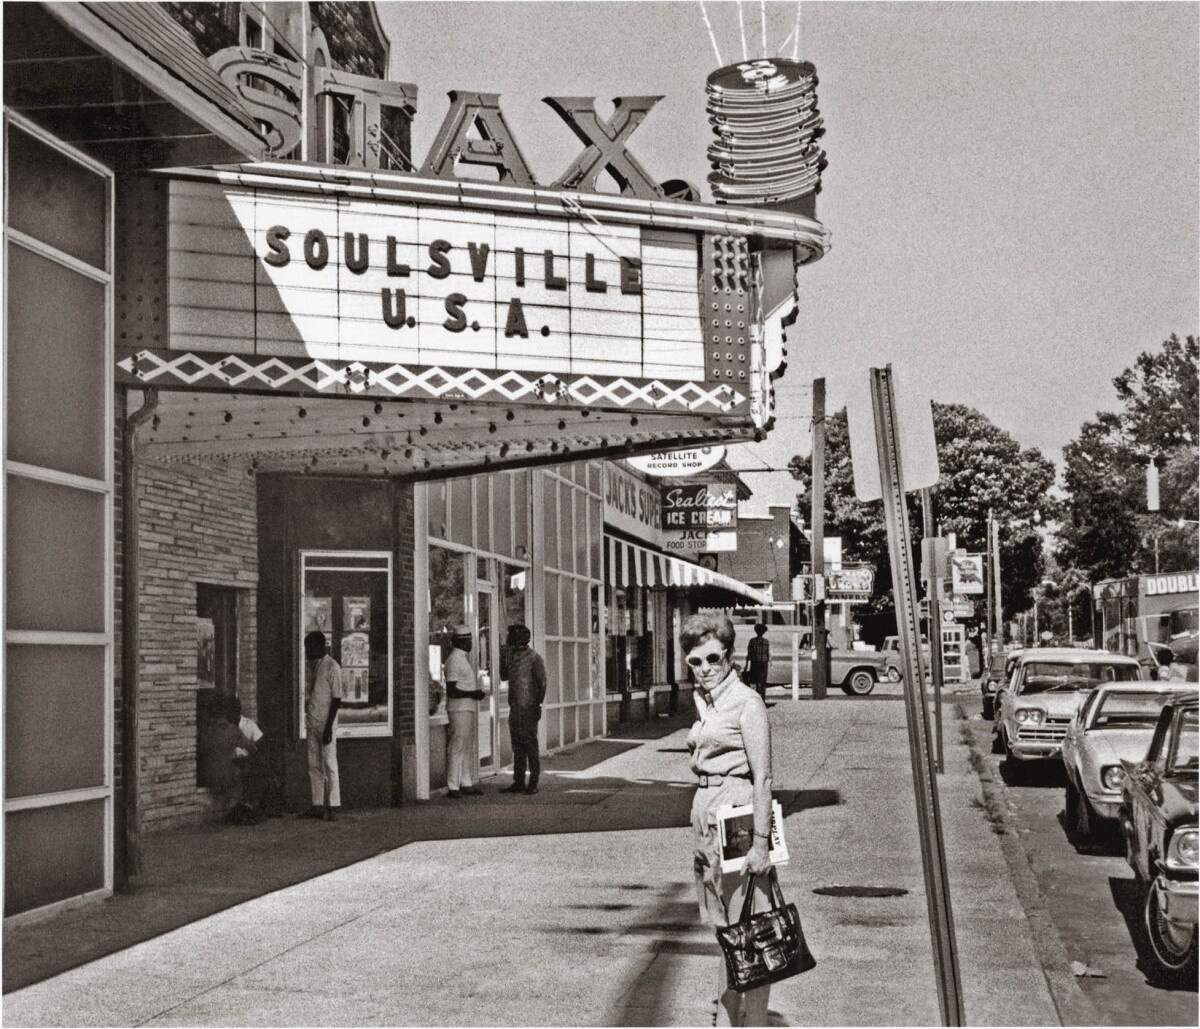 axton_outside_of_stax_records_studio_1968_cc